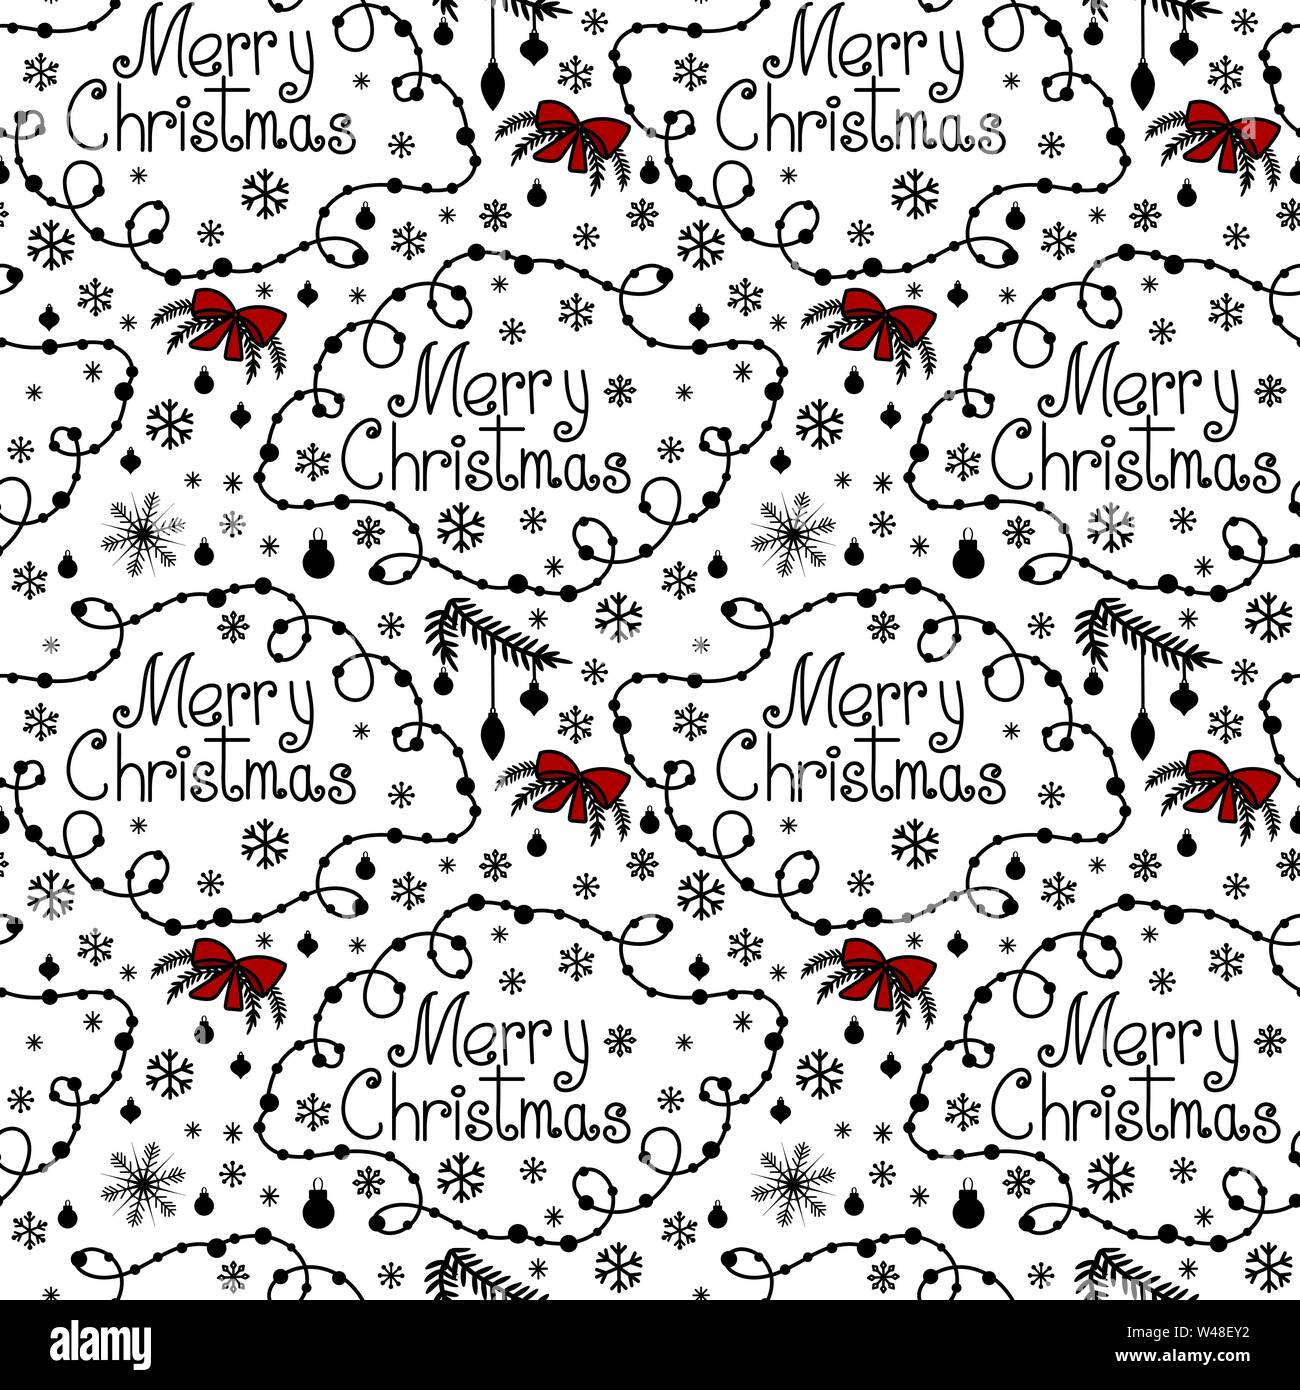 Merry Christmas background with hand drawn text, swirls and snowflakes. Hand drawn doodle style. Red and black colors. Isolated on white background. Perfect for wrapping paper, wallpaper, fabric print Stock Vector